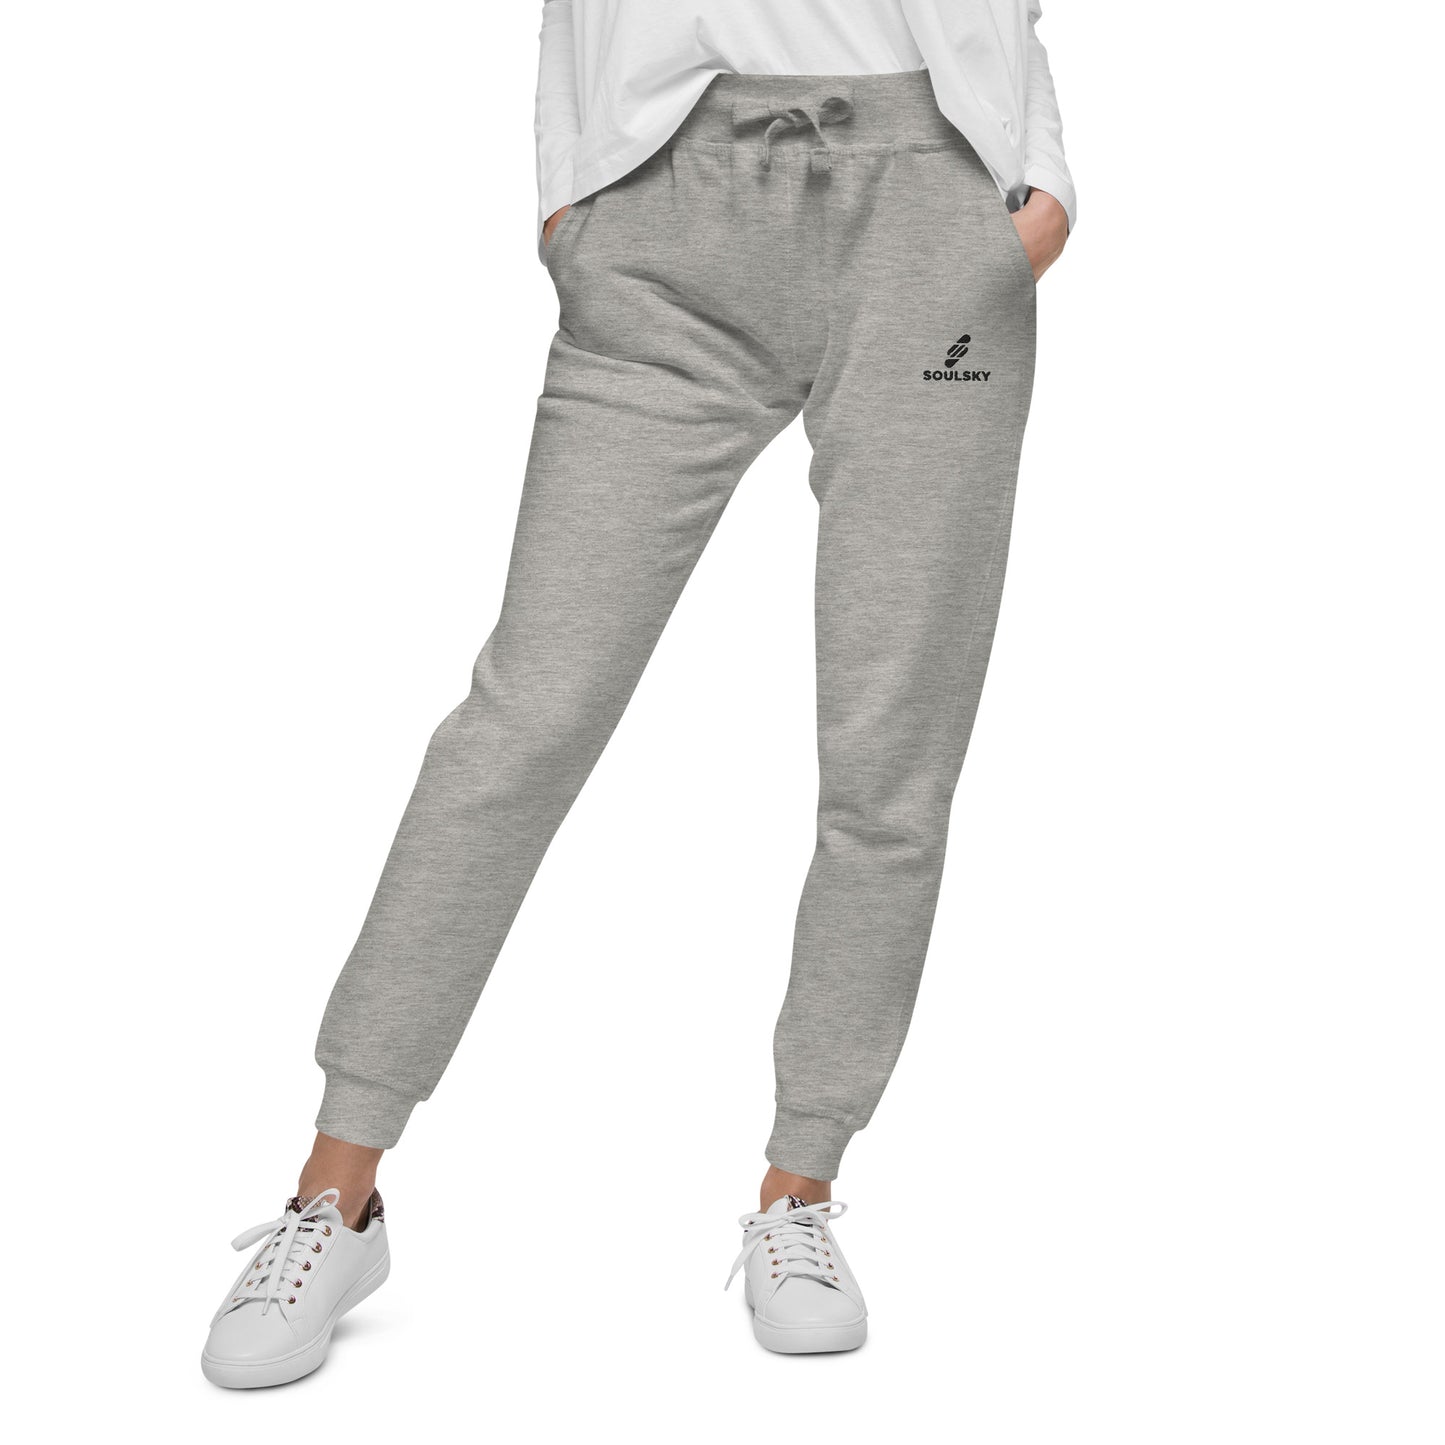 Female model wearing light gray unisex joggers with black embroidered logo on left thigh that says "SOULSKY".